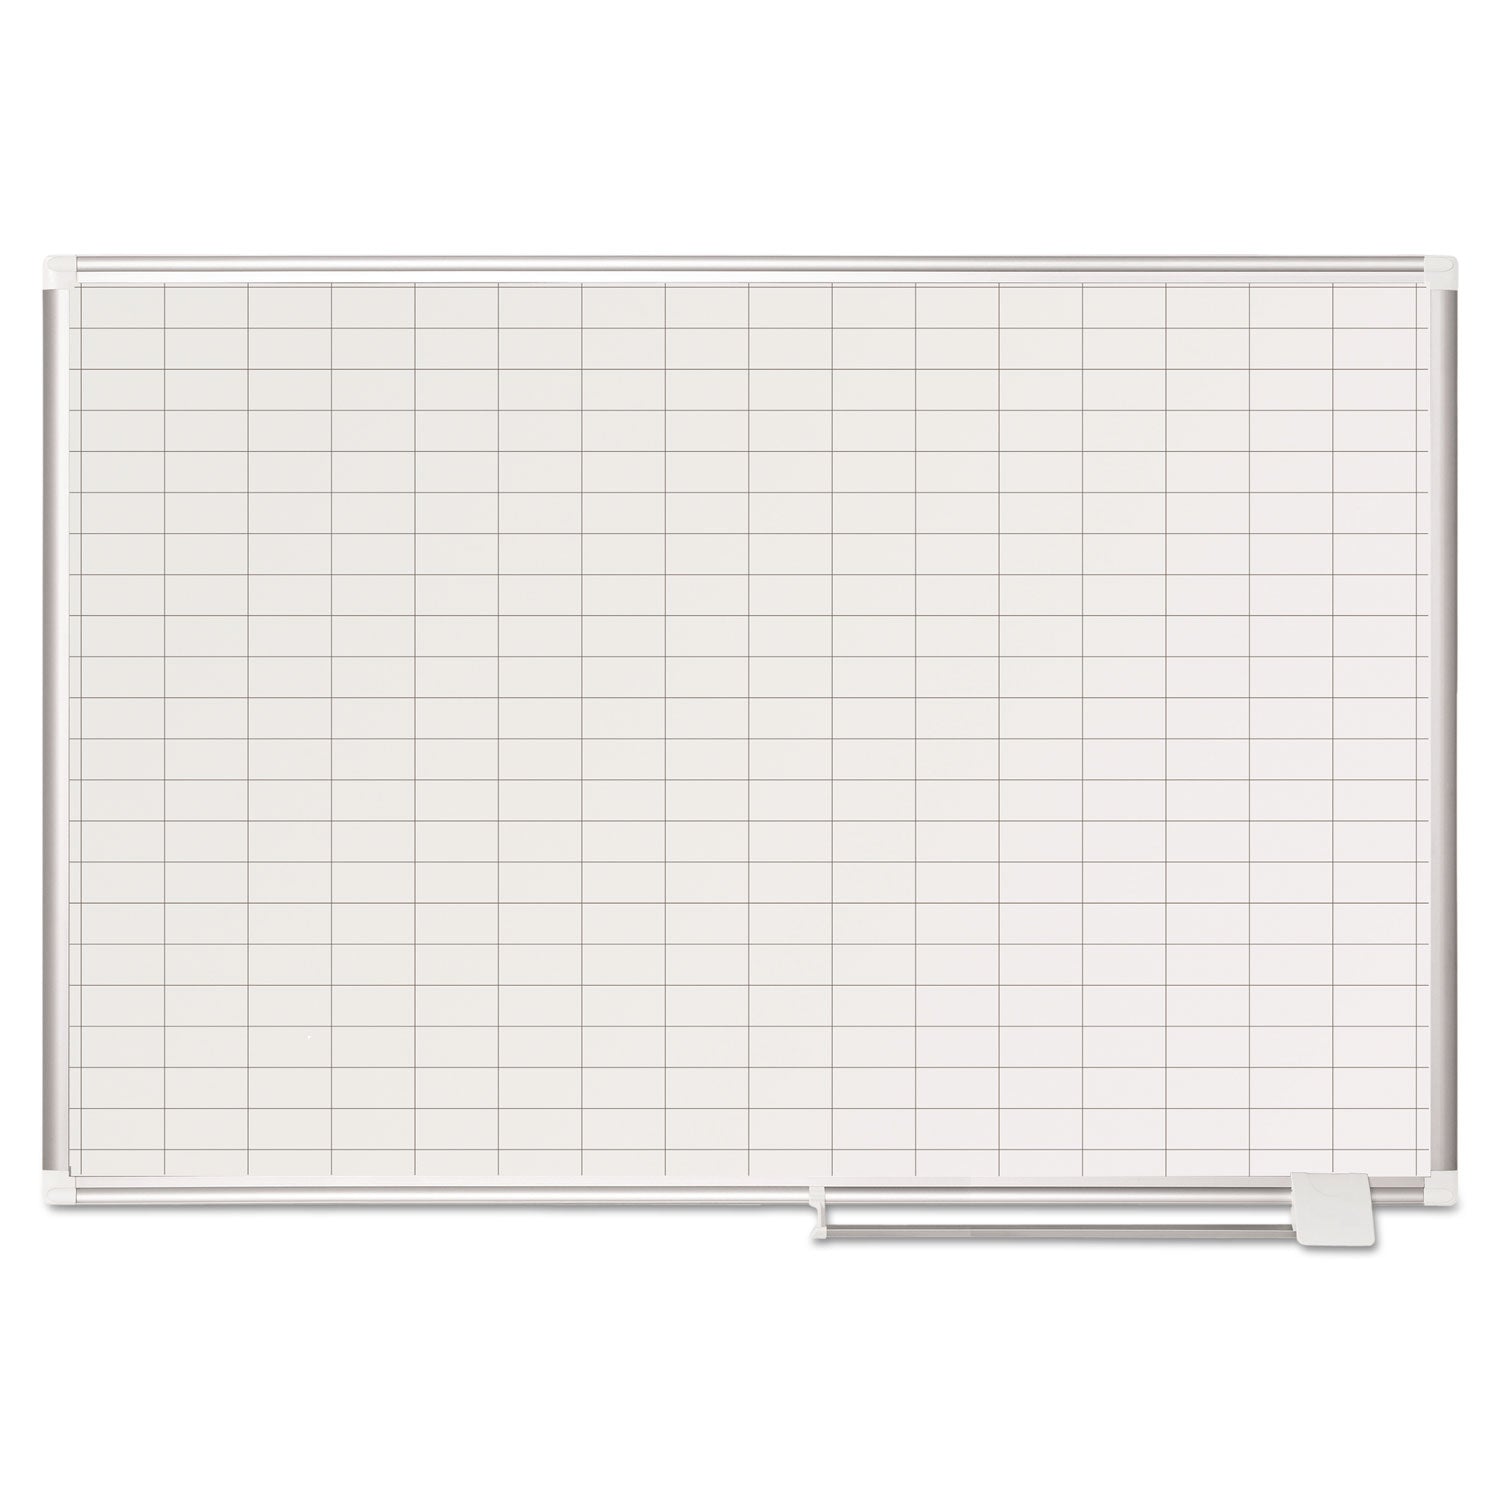 Gridded Magnetic Steel Dry Erase Planning Board, 1 x 2 Grid, 48 x 36, White Surface, Silver Aluminum Frame - 